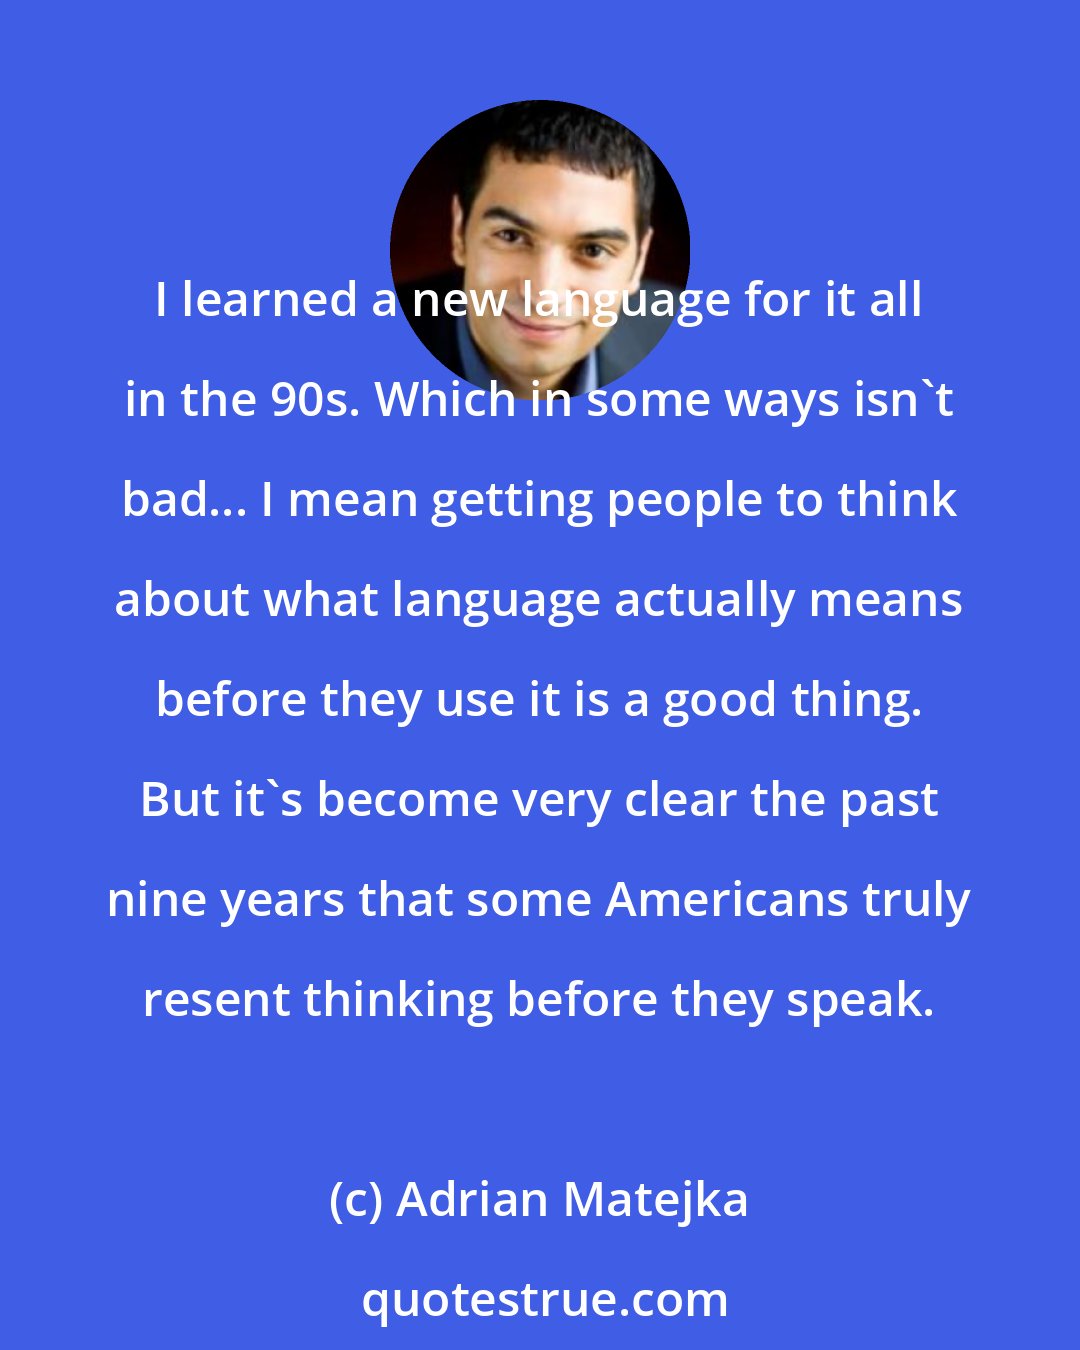 Adrian Matejka: I learned a new language for it all in the 90s. Which in some ways isn't bad... I mean getting people to think about what language actually means before they use it is a good thing. But it's become very clear the past nine years that some Americans truly resent thinking before they speak.